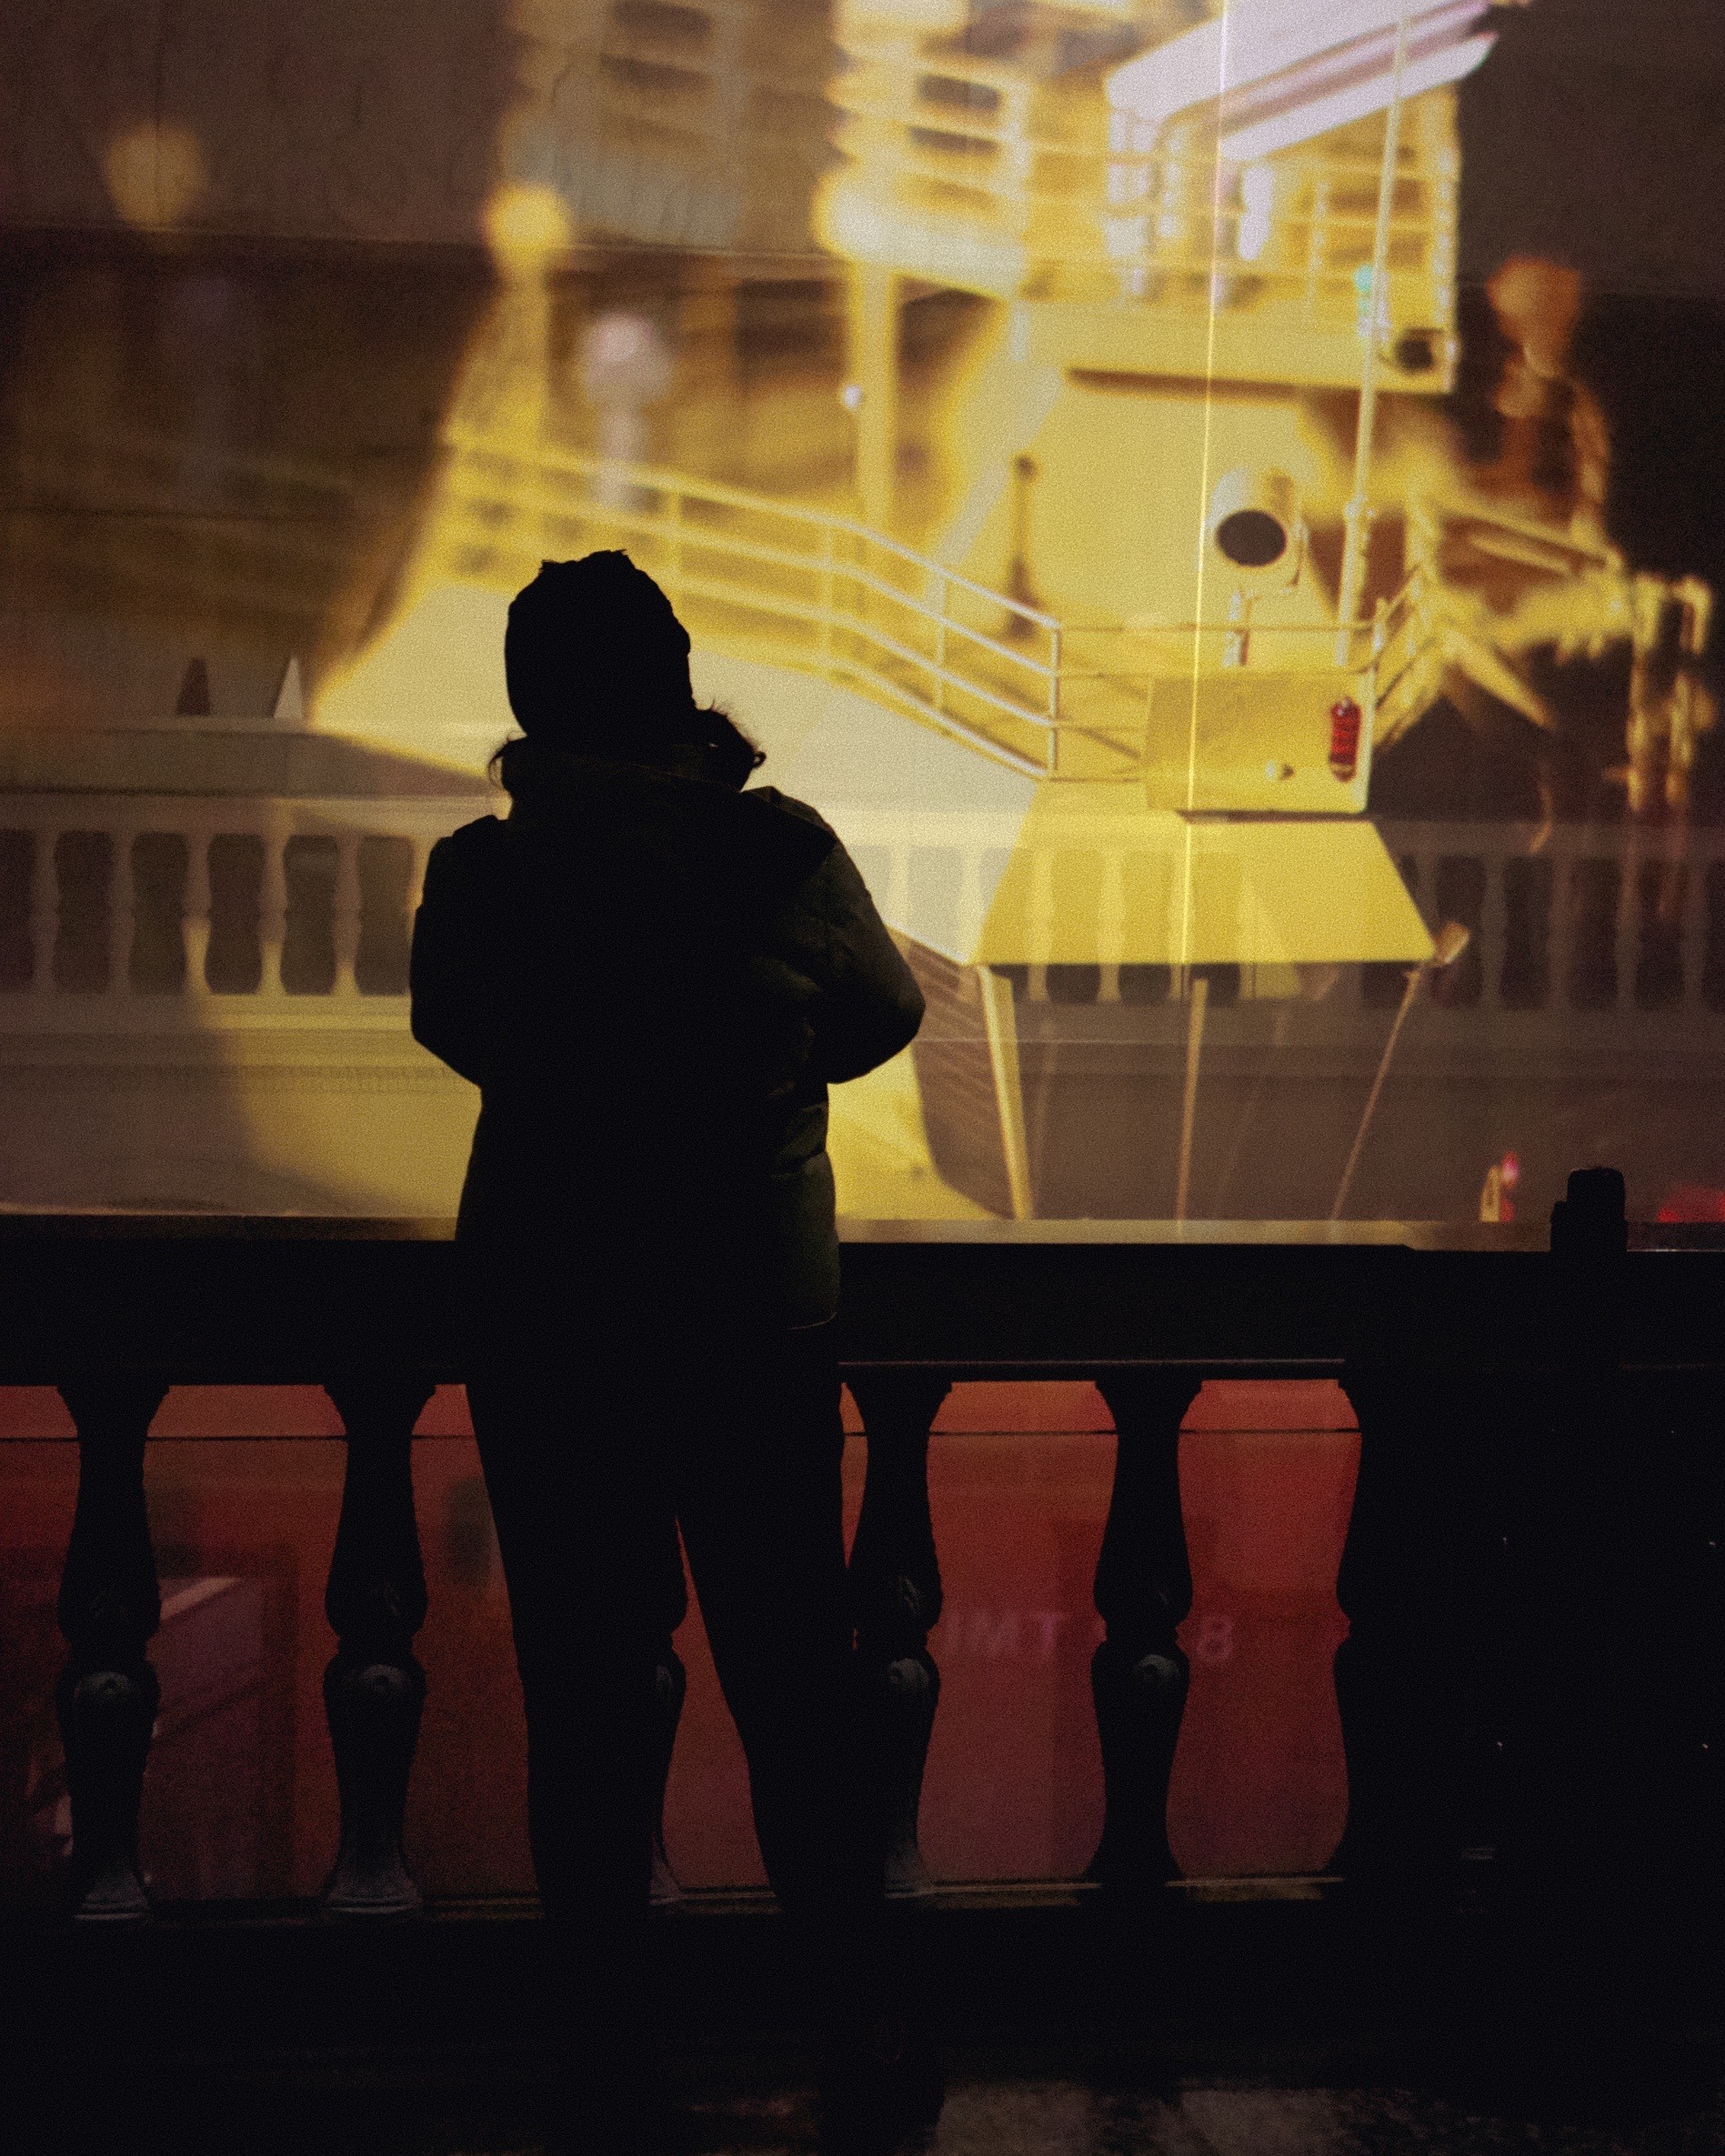 The image captures the silhouette of a person standing behind a balustrade, with a large, illuminated projection of a ship's structure cast upon them and the wall. The person appears to be photographing or observing the projected image, which includes details like stairs and railings on the ship. The reddish ambient lighting adds to the dramatic effect, creating a contrast between the silhouette and the golden hues of the projected ship.